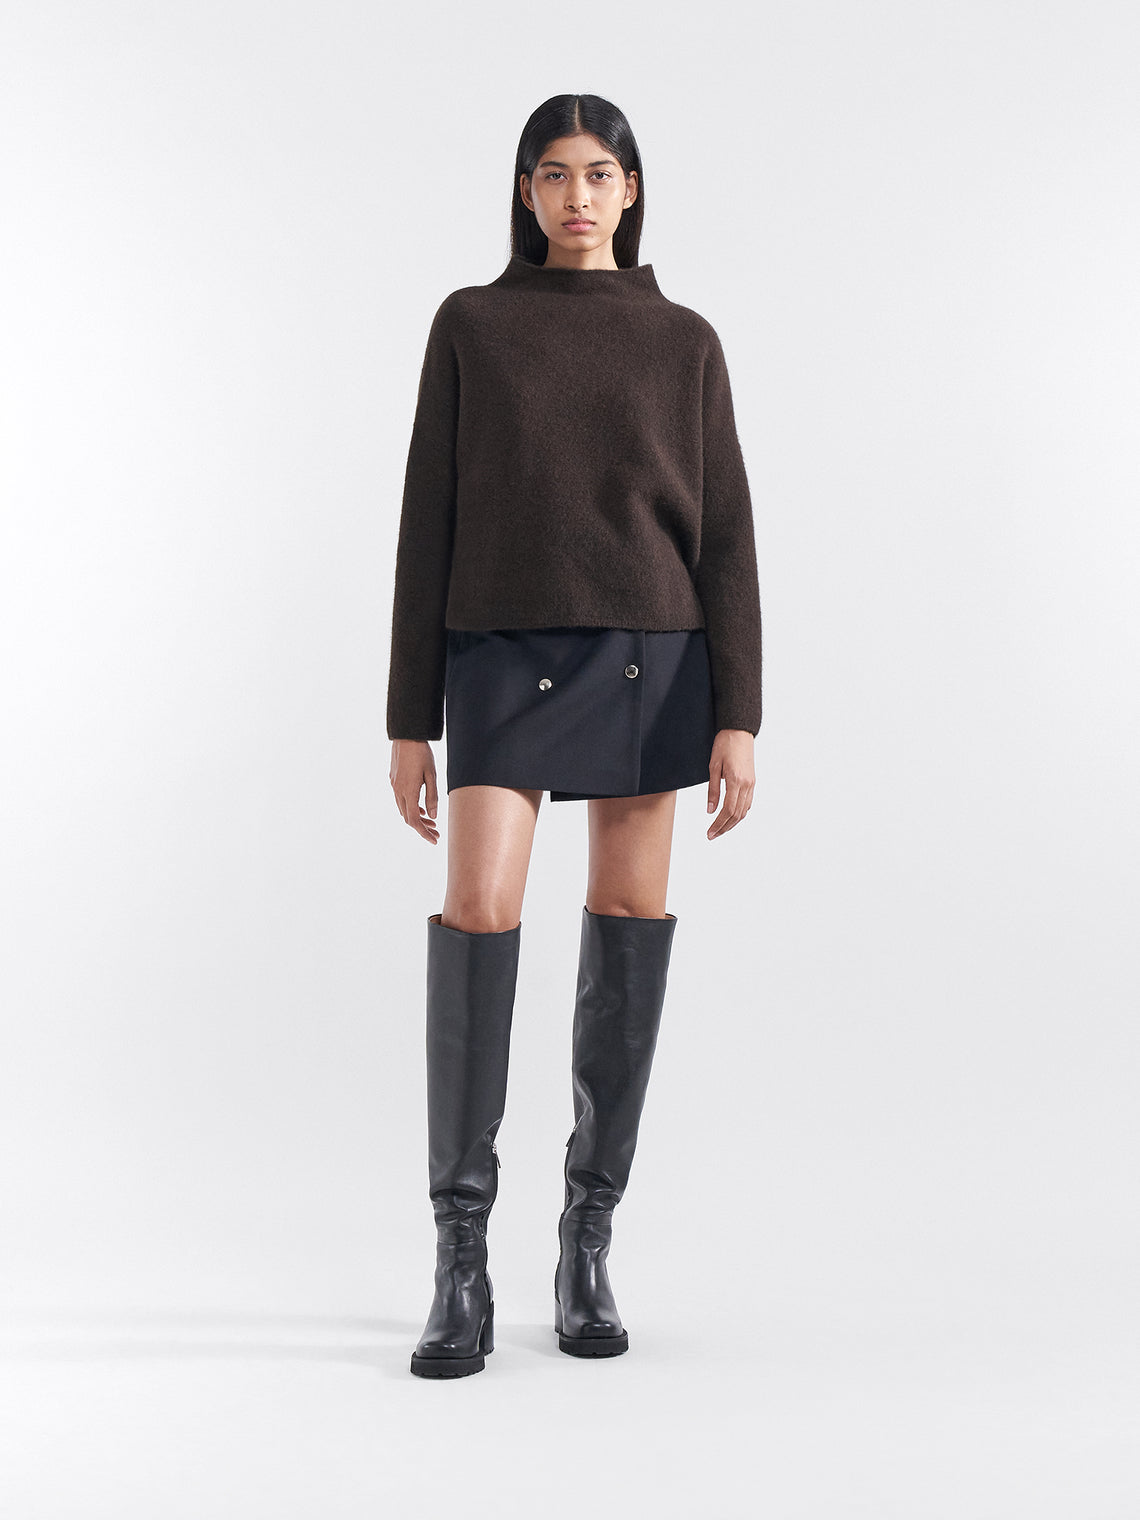 Mika yak funnelneck knitted sweater by Filippa K - ginger brown